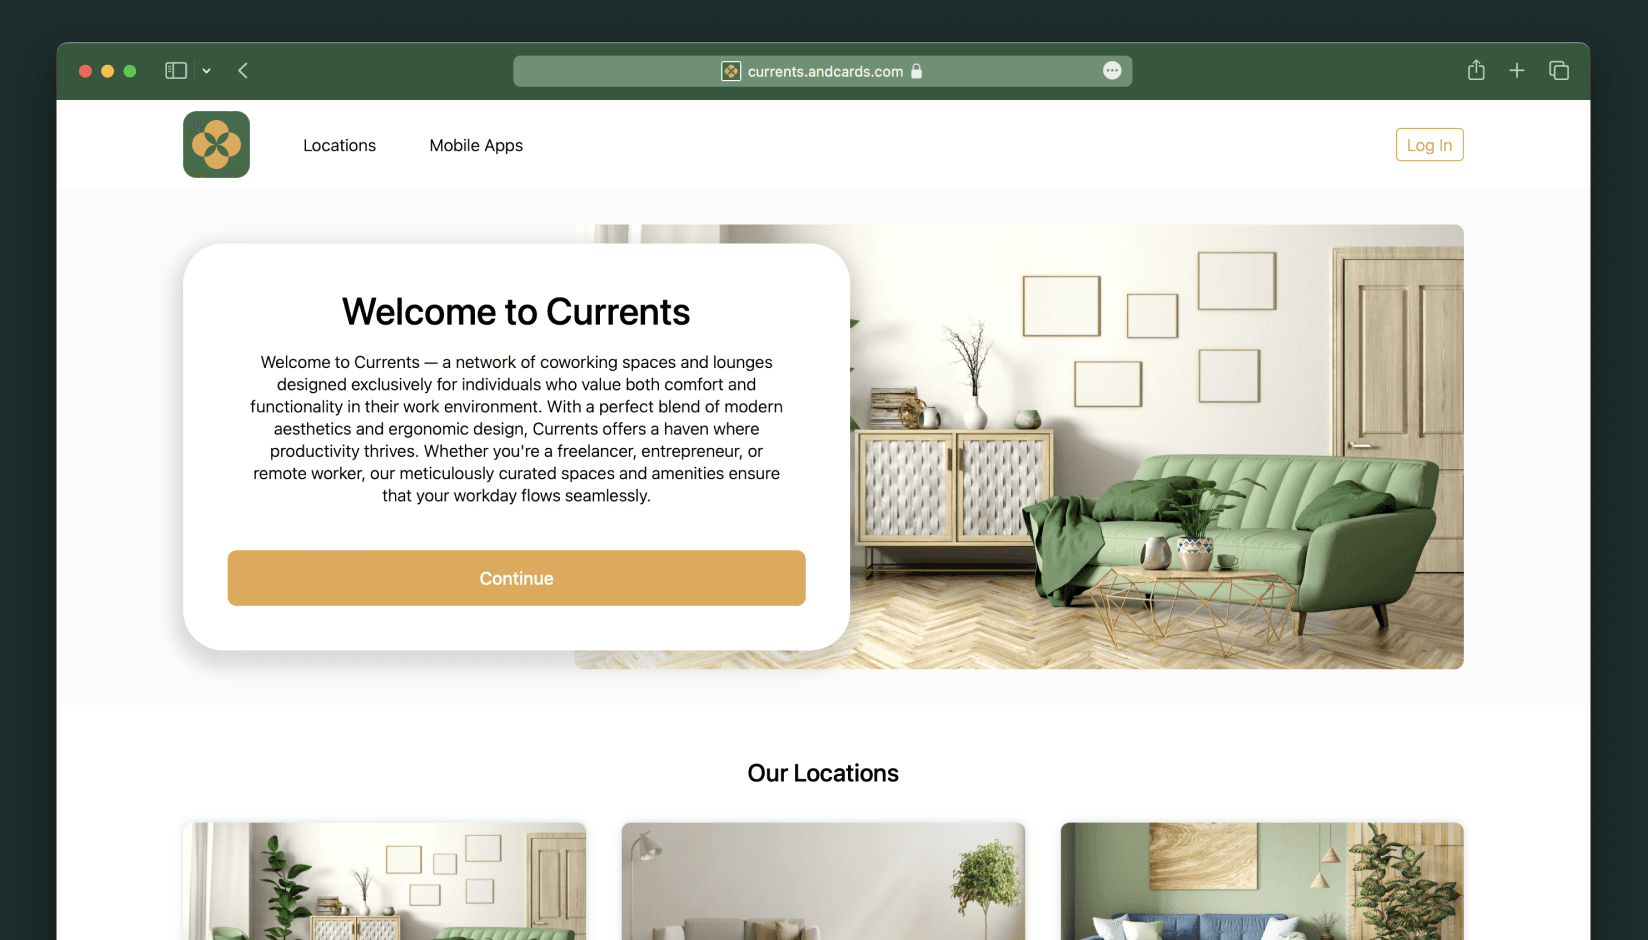 Landing page on andcards coworking space software